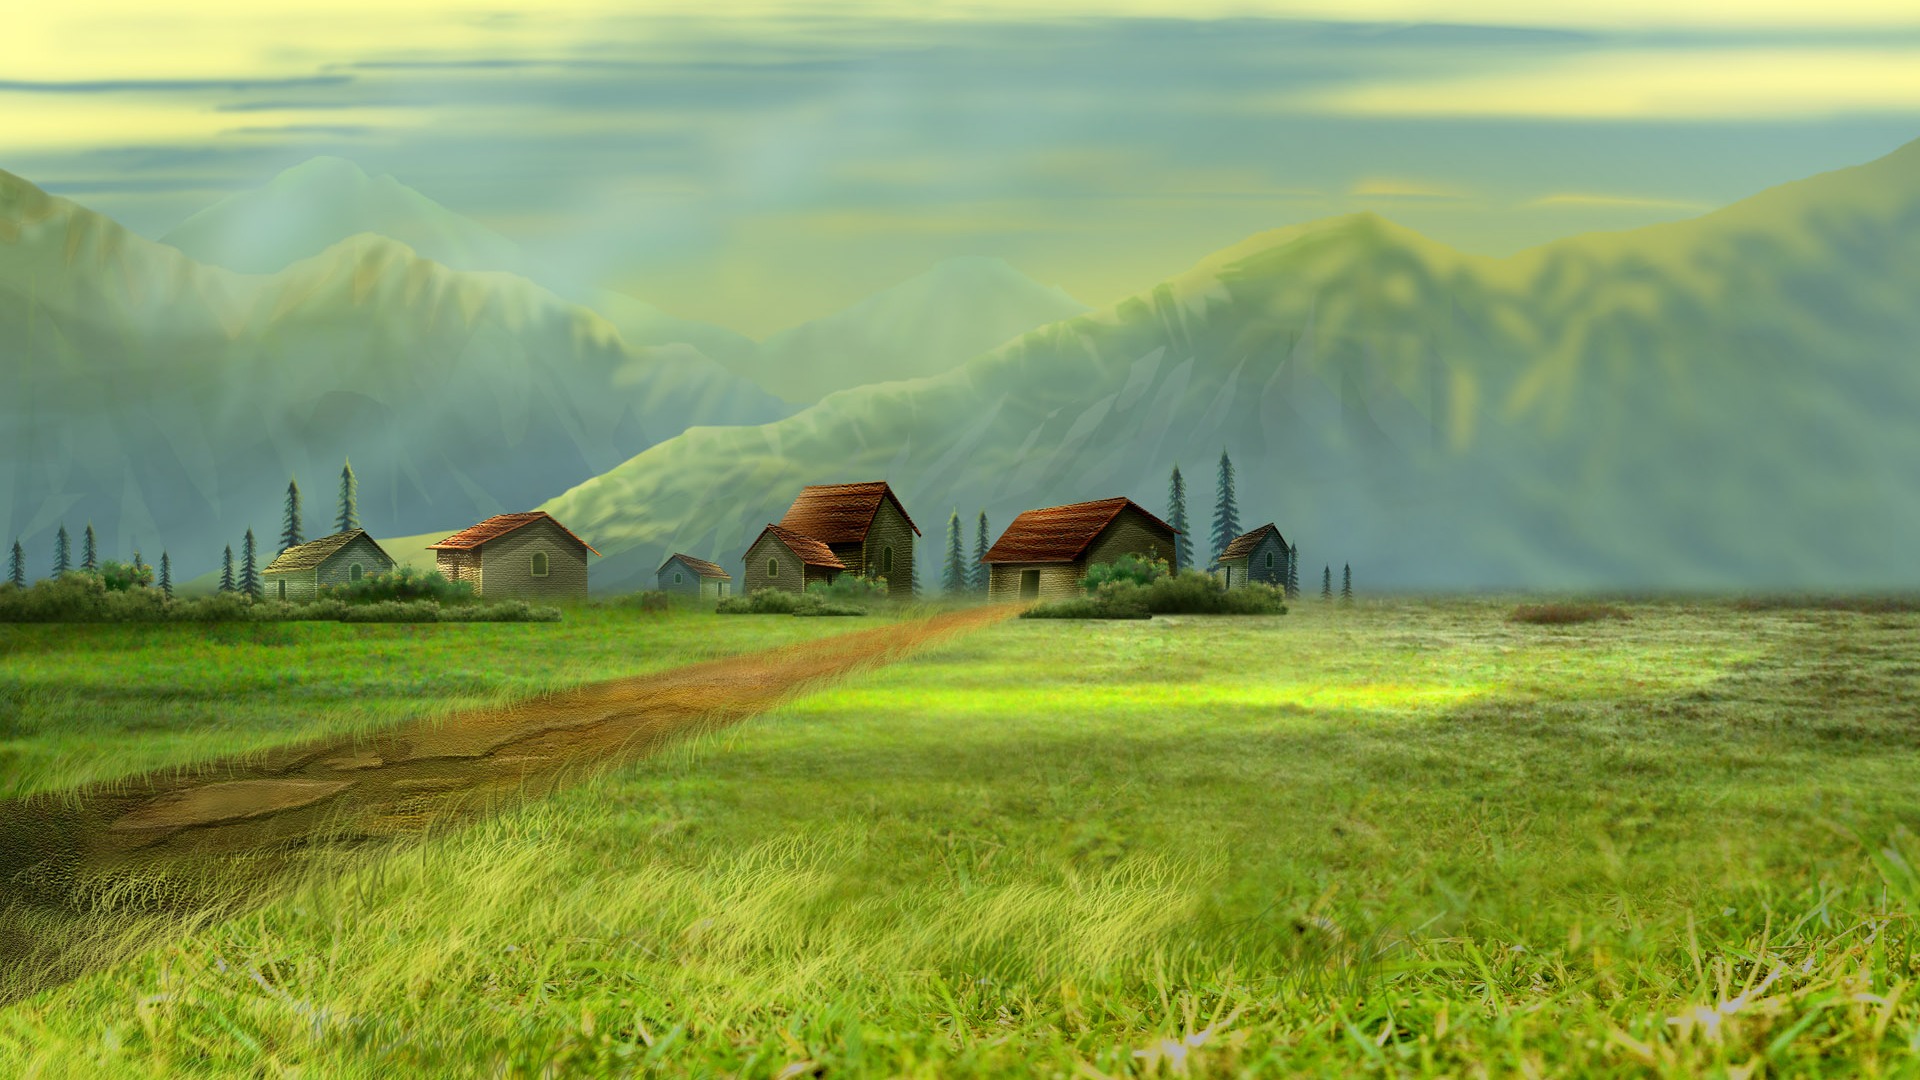 Colorful hand-painted wallpaper landscape ecology (3) #13 - 1920x1080